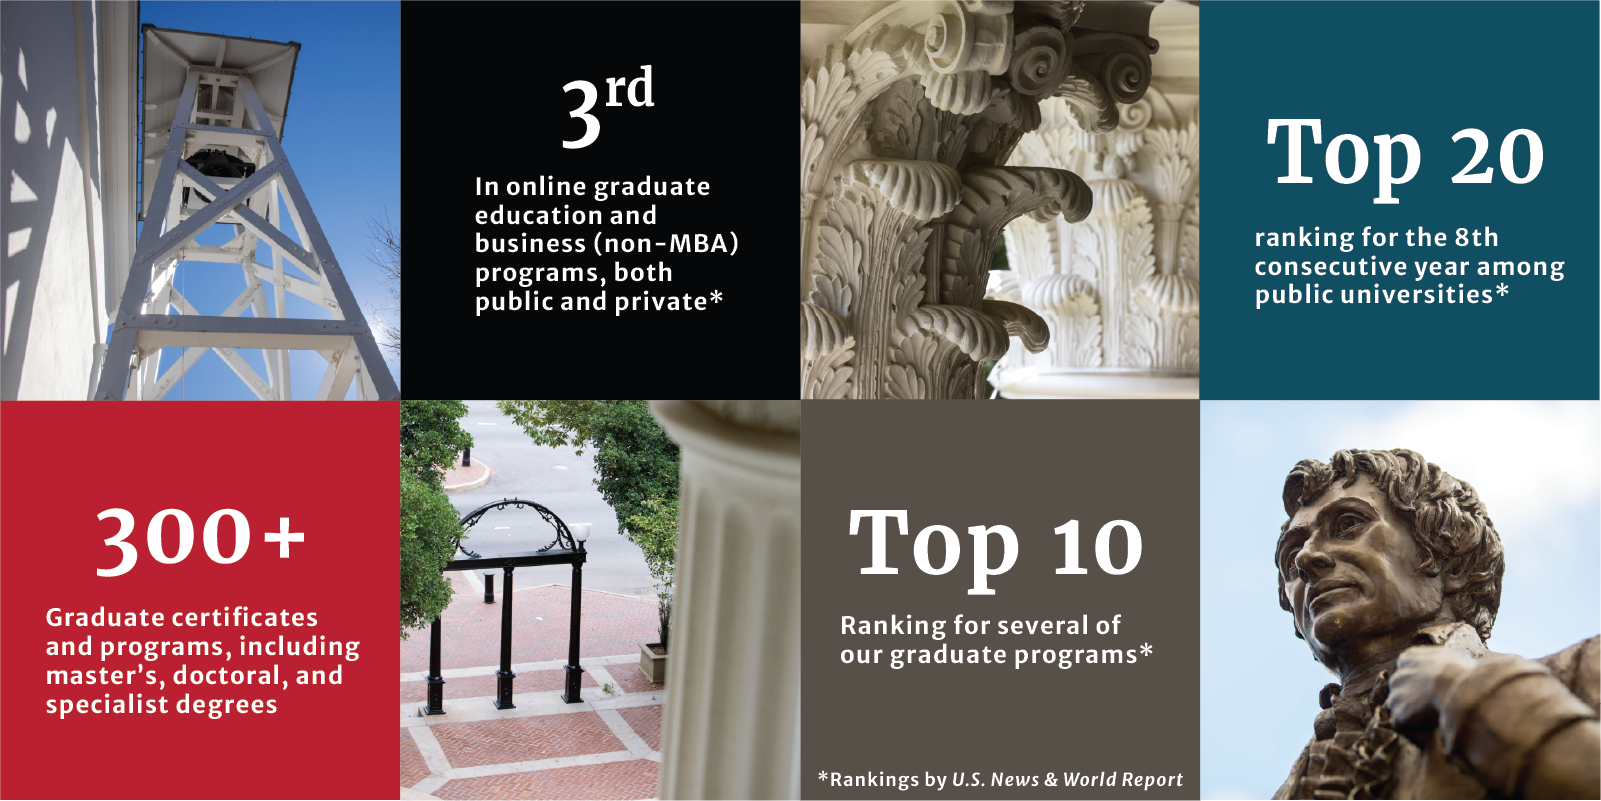 The UGA Graduate School ranks 3rd in online graduate education and business (non-MBA) programs, both public and private; Top 20 ranking for the 8th consecutive year among public universities; 300+ graduate certificates and programs, including master's, doctoral, and specialist degrees; Top 10 ranking for several of our graduate programs. Rankings by U.S. News & World Report